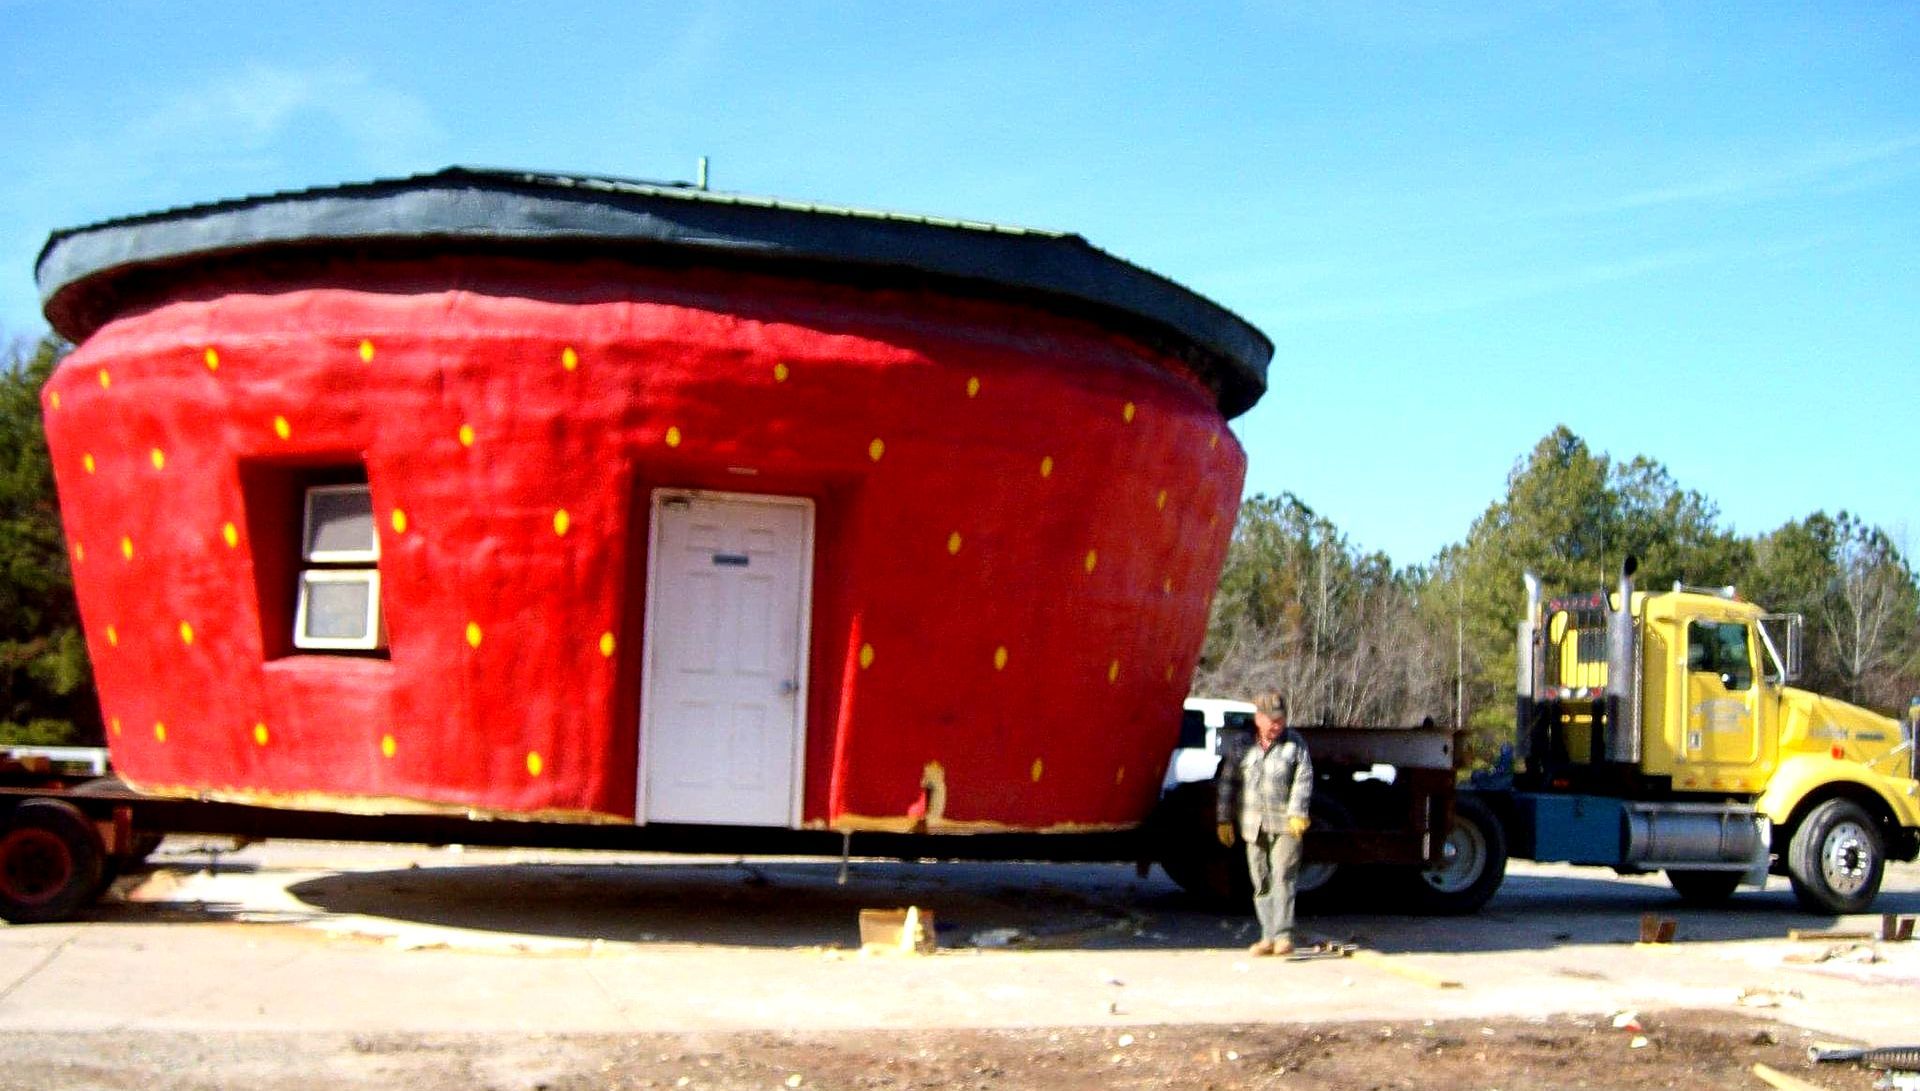 World's Largest Strawberry-shaped Building, world record in Ellerbe, North Carolina